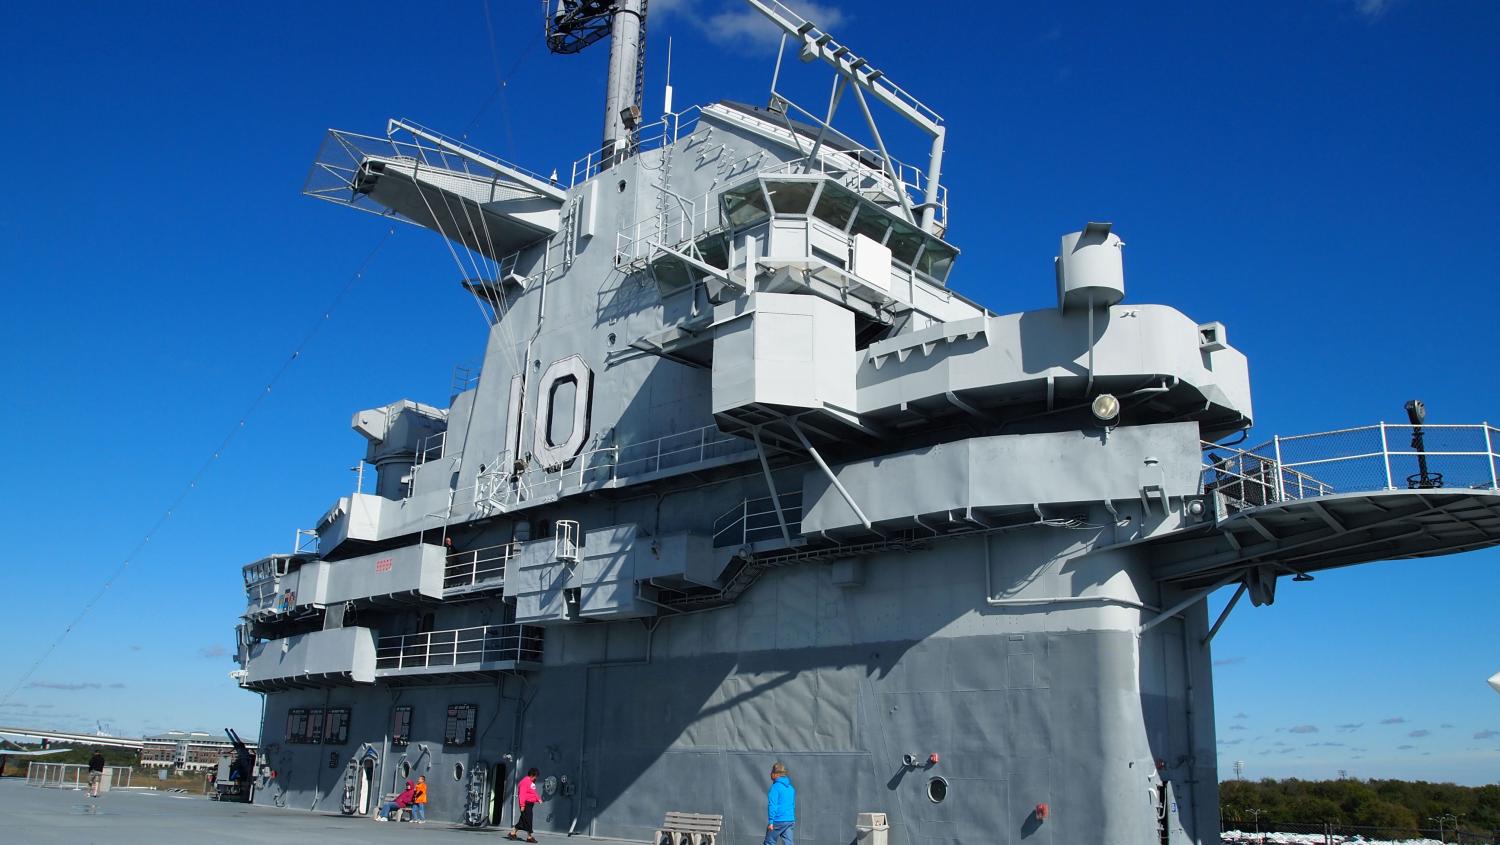 Superstructure of the USS Yorktown, CV-10 (By Fancy-cats-are-happy-cats)